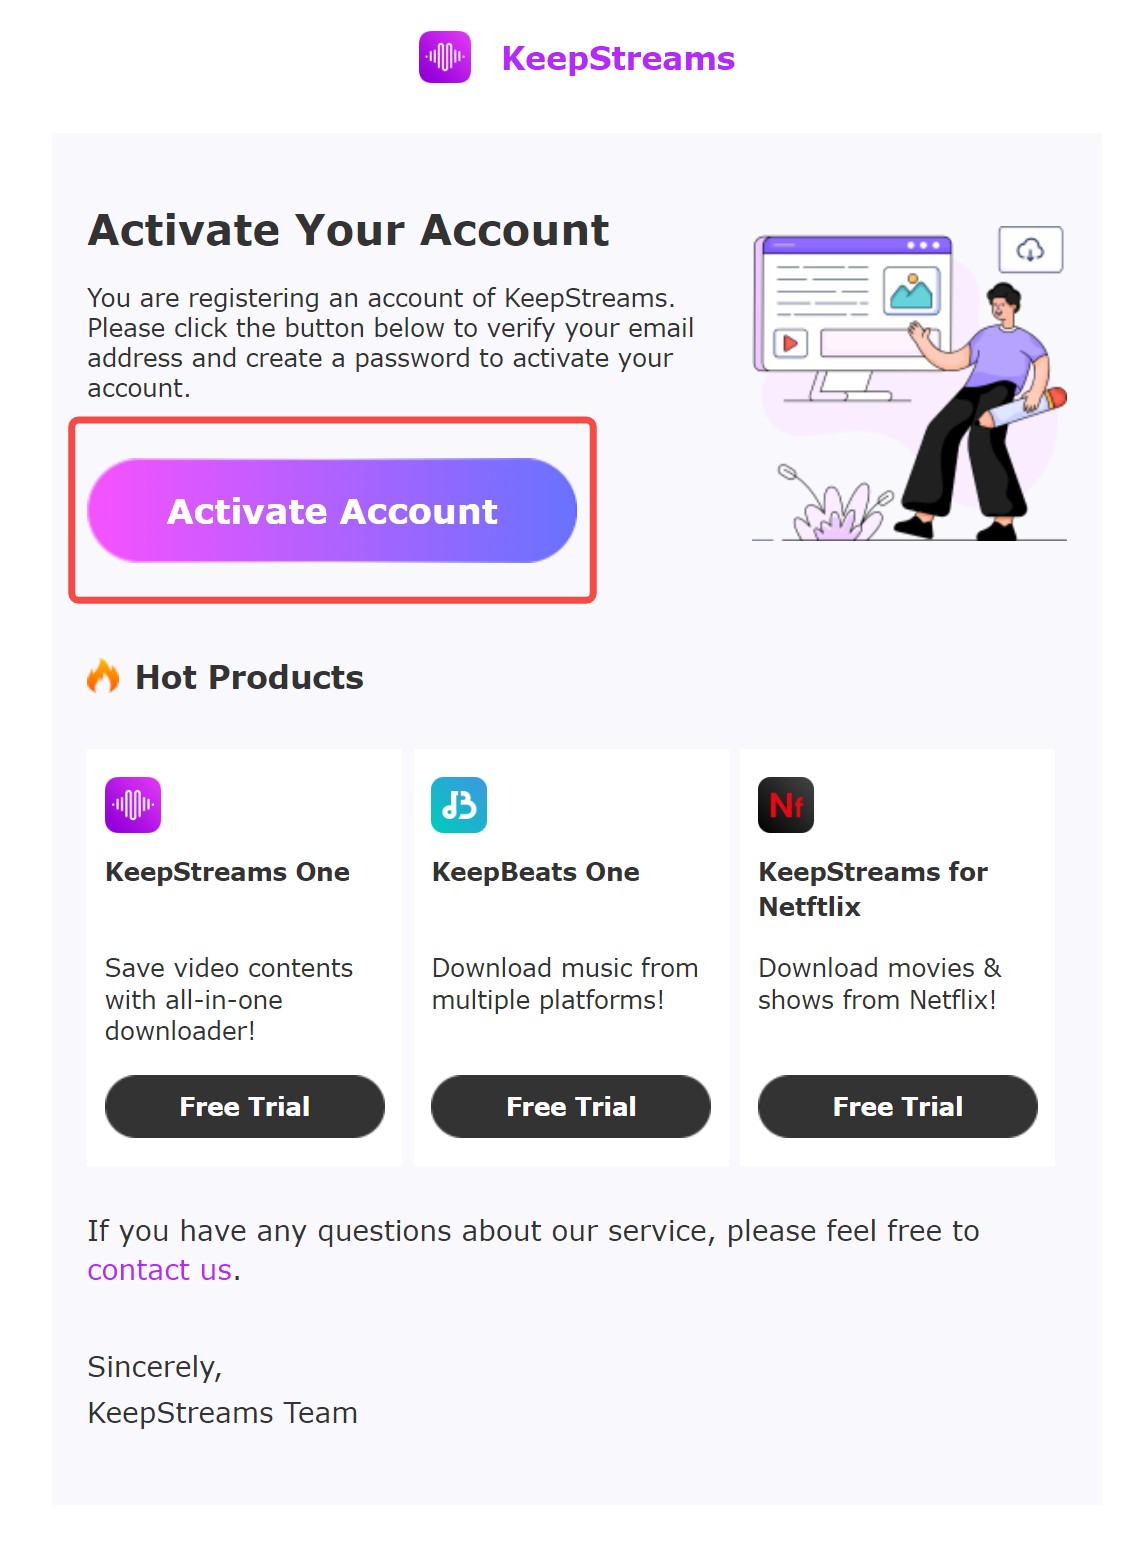 Check the Activate Your Account email